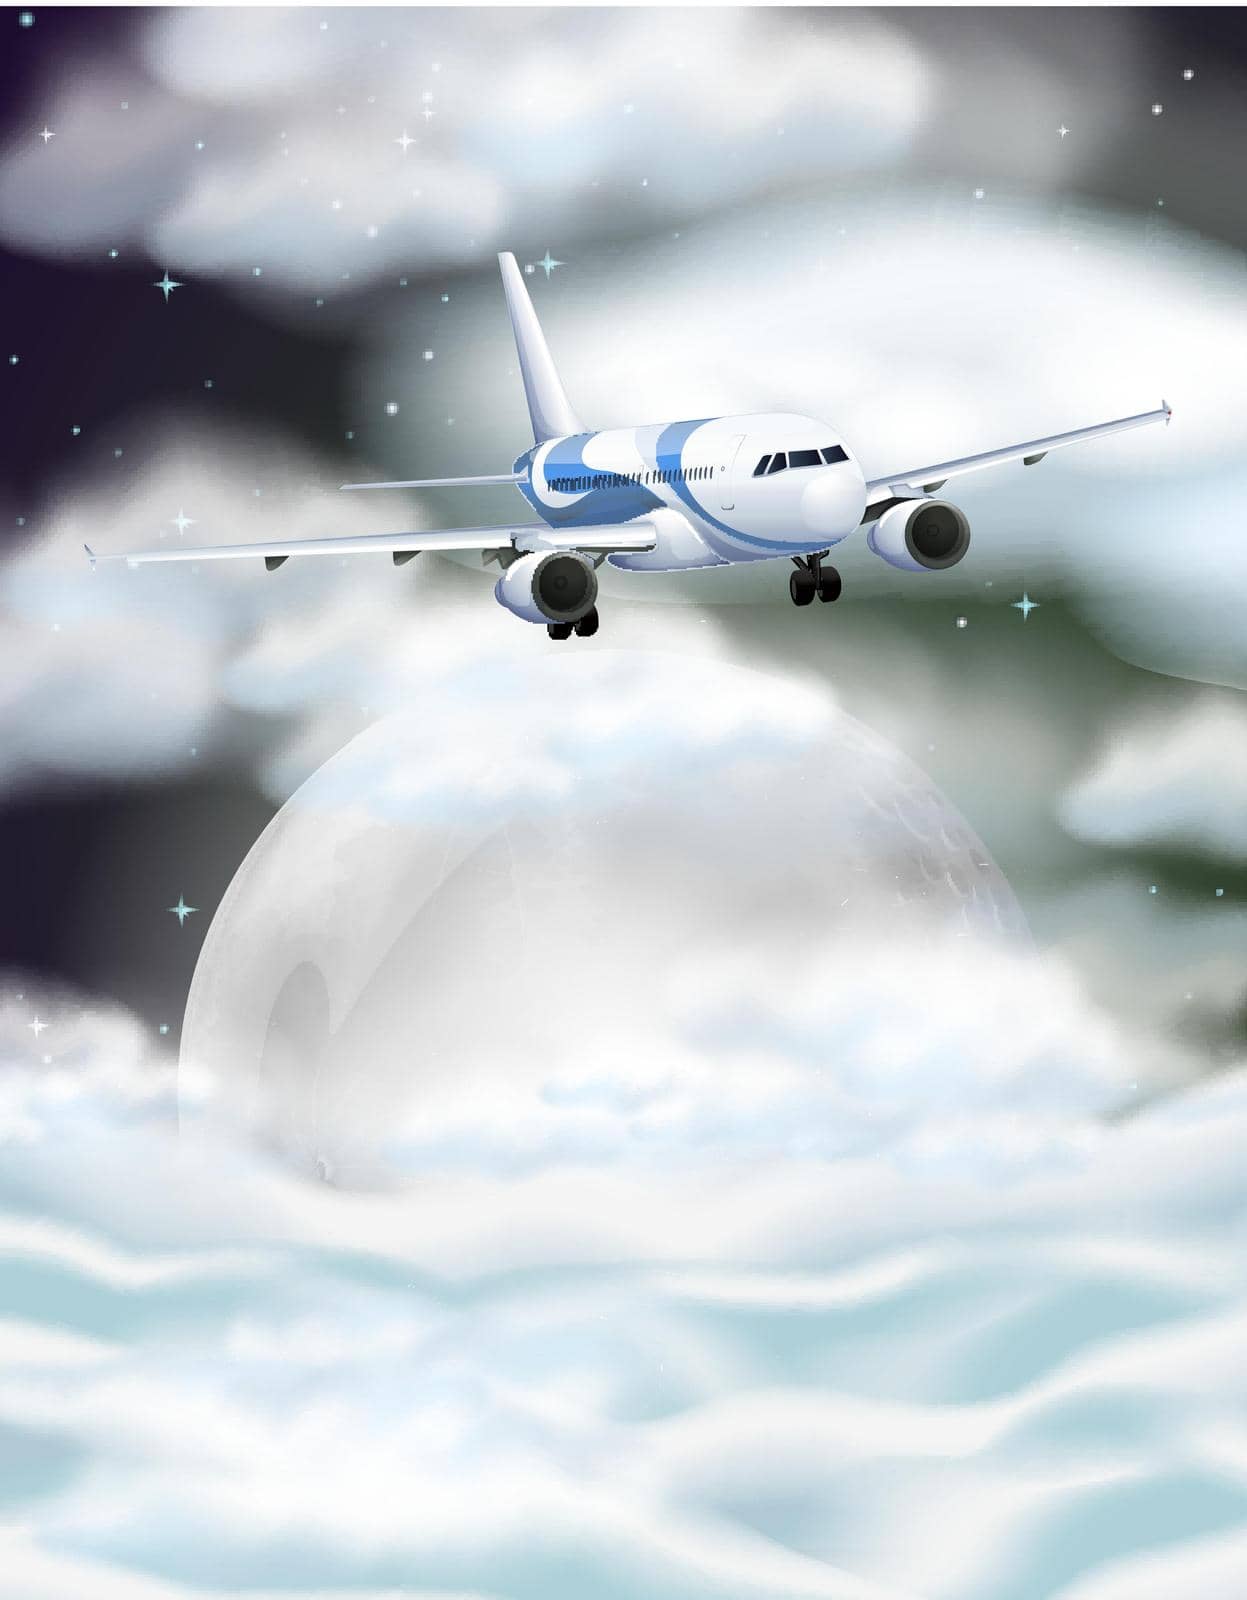 Airplane flying at night time illustration